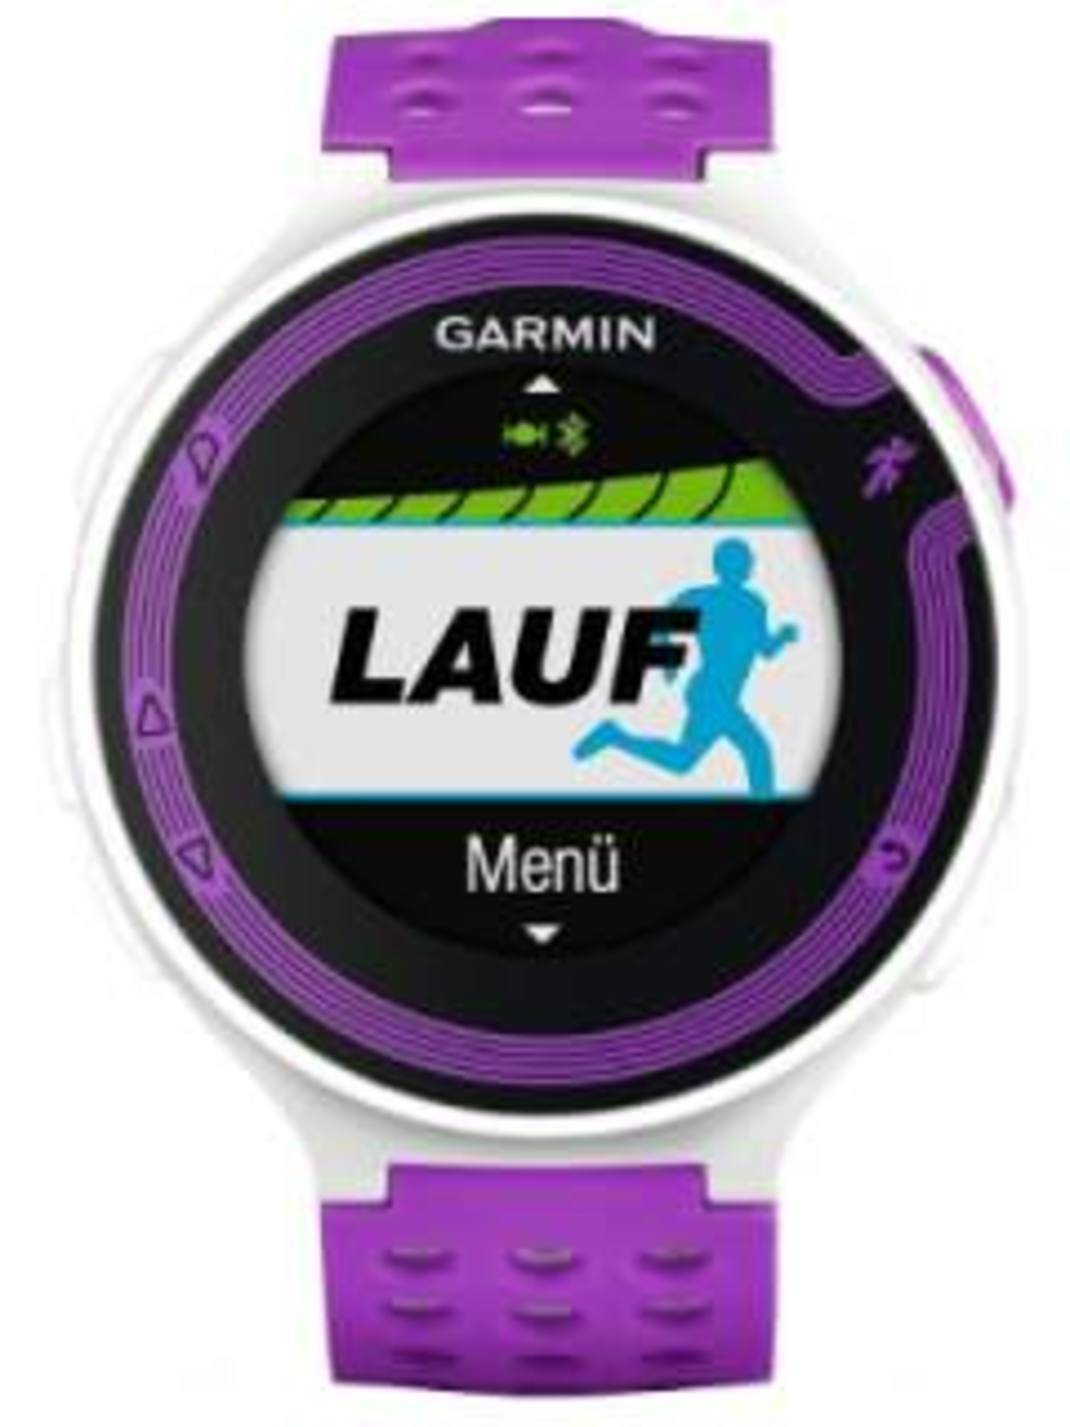 Compare Garmin Forerunner 220 vs Garmin Forerunner 620 - Garmin Forerunner 220 vs Garmin Forerunner 620 Comparison Price, Specifications, Reviews &amp; Features | Gadgets Now